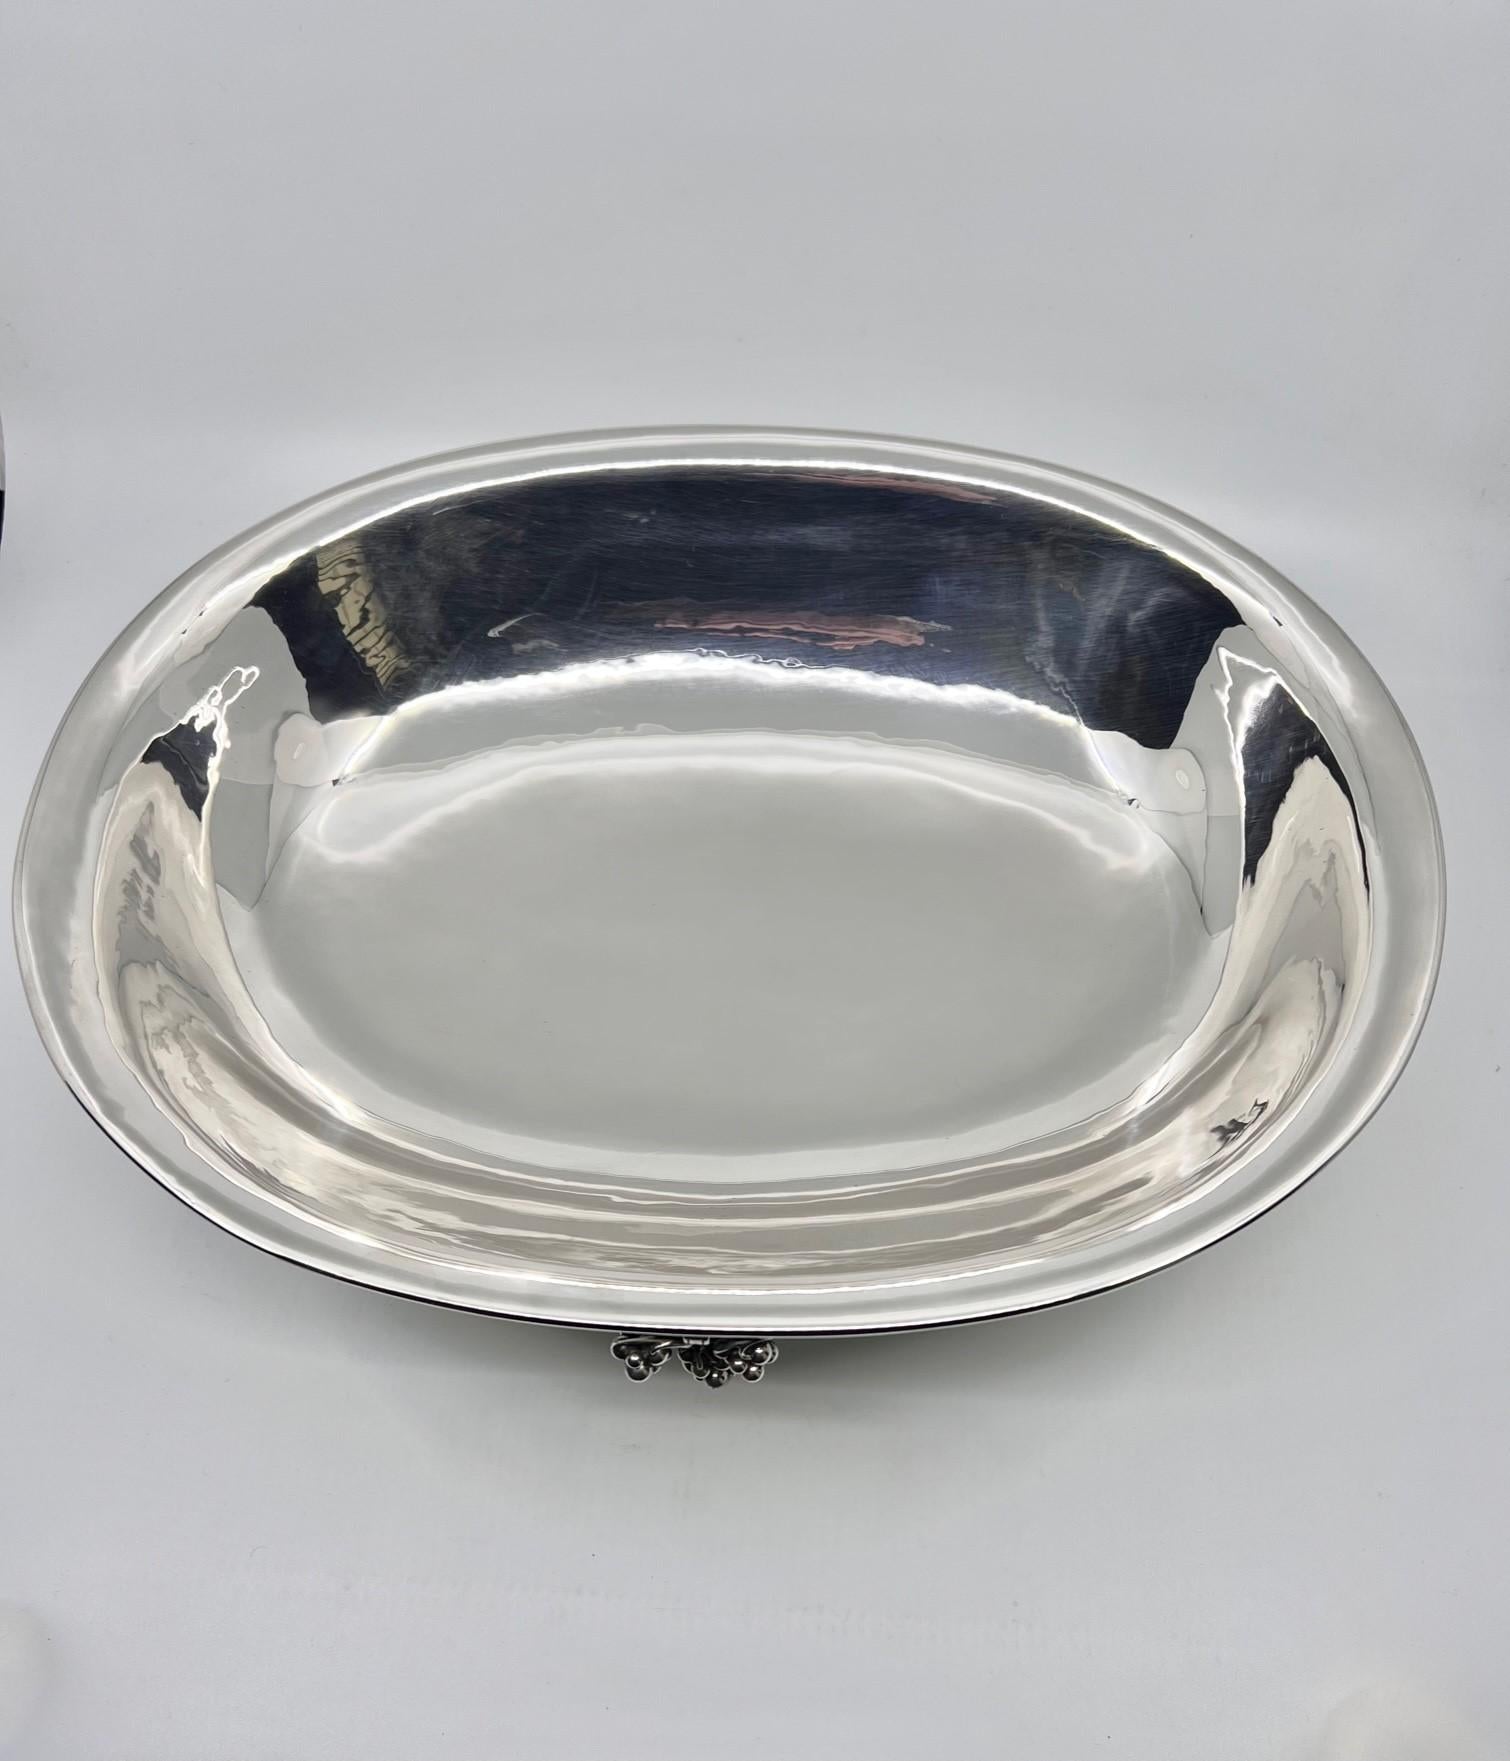 Georg Jensen Large Sterling Silver Grape Centerpiece Bowl 296A In Excellent Condition For Sale In Hellerup, DK